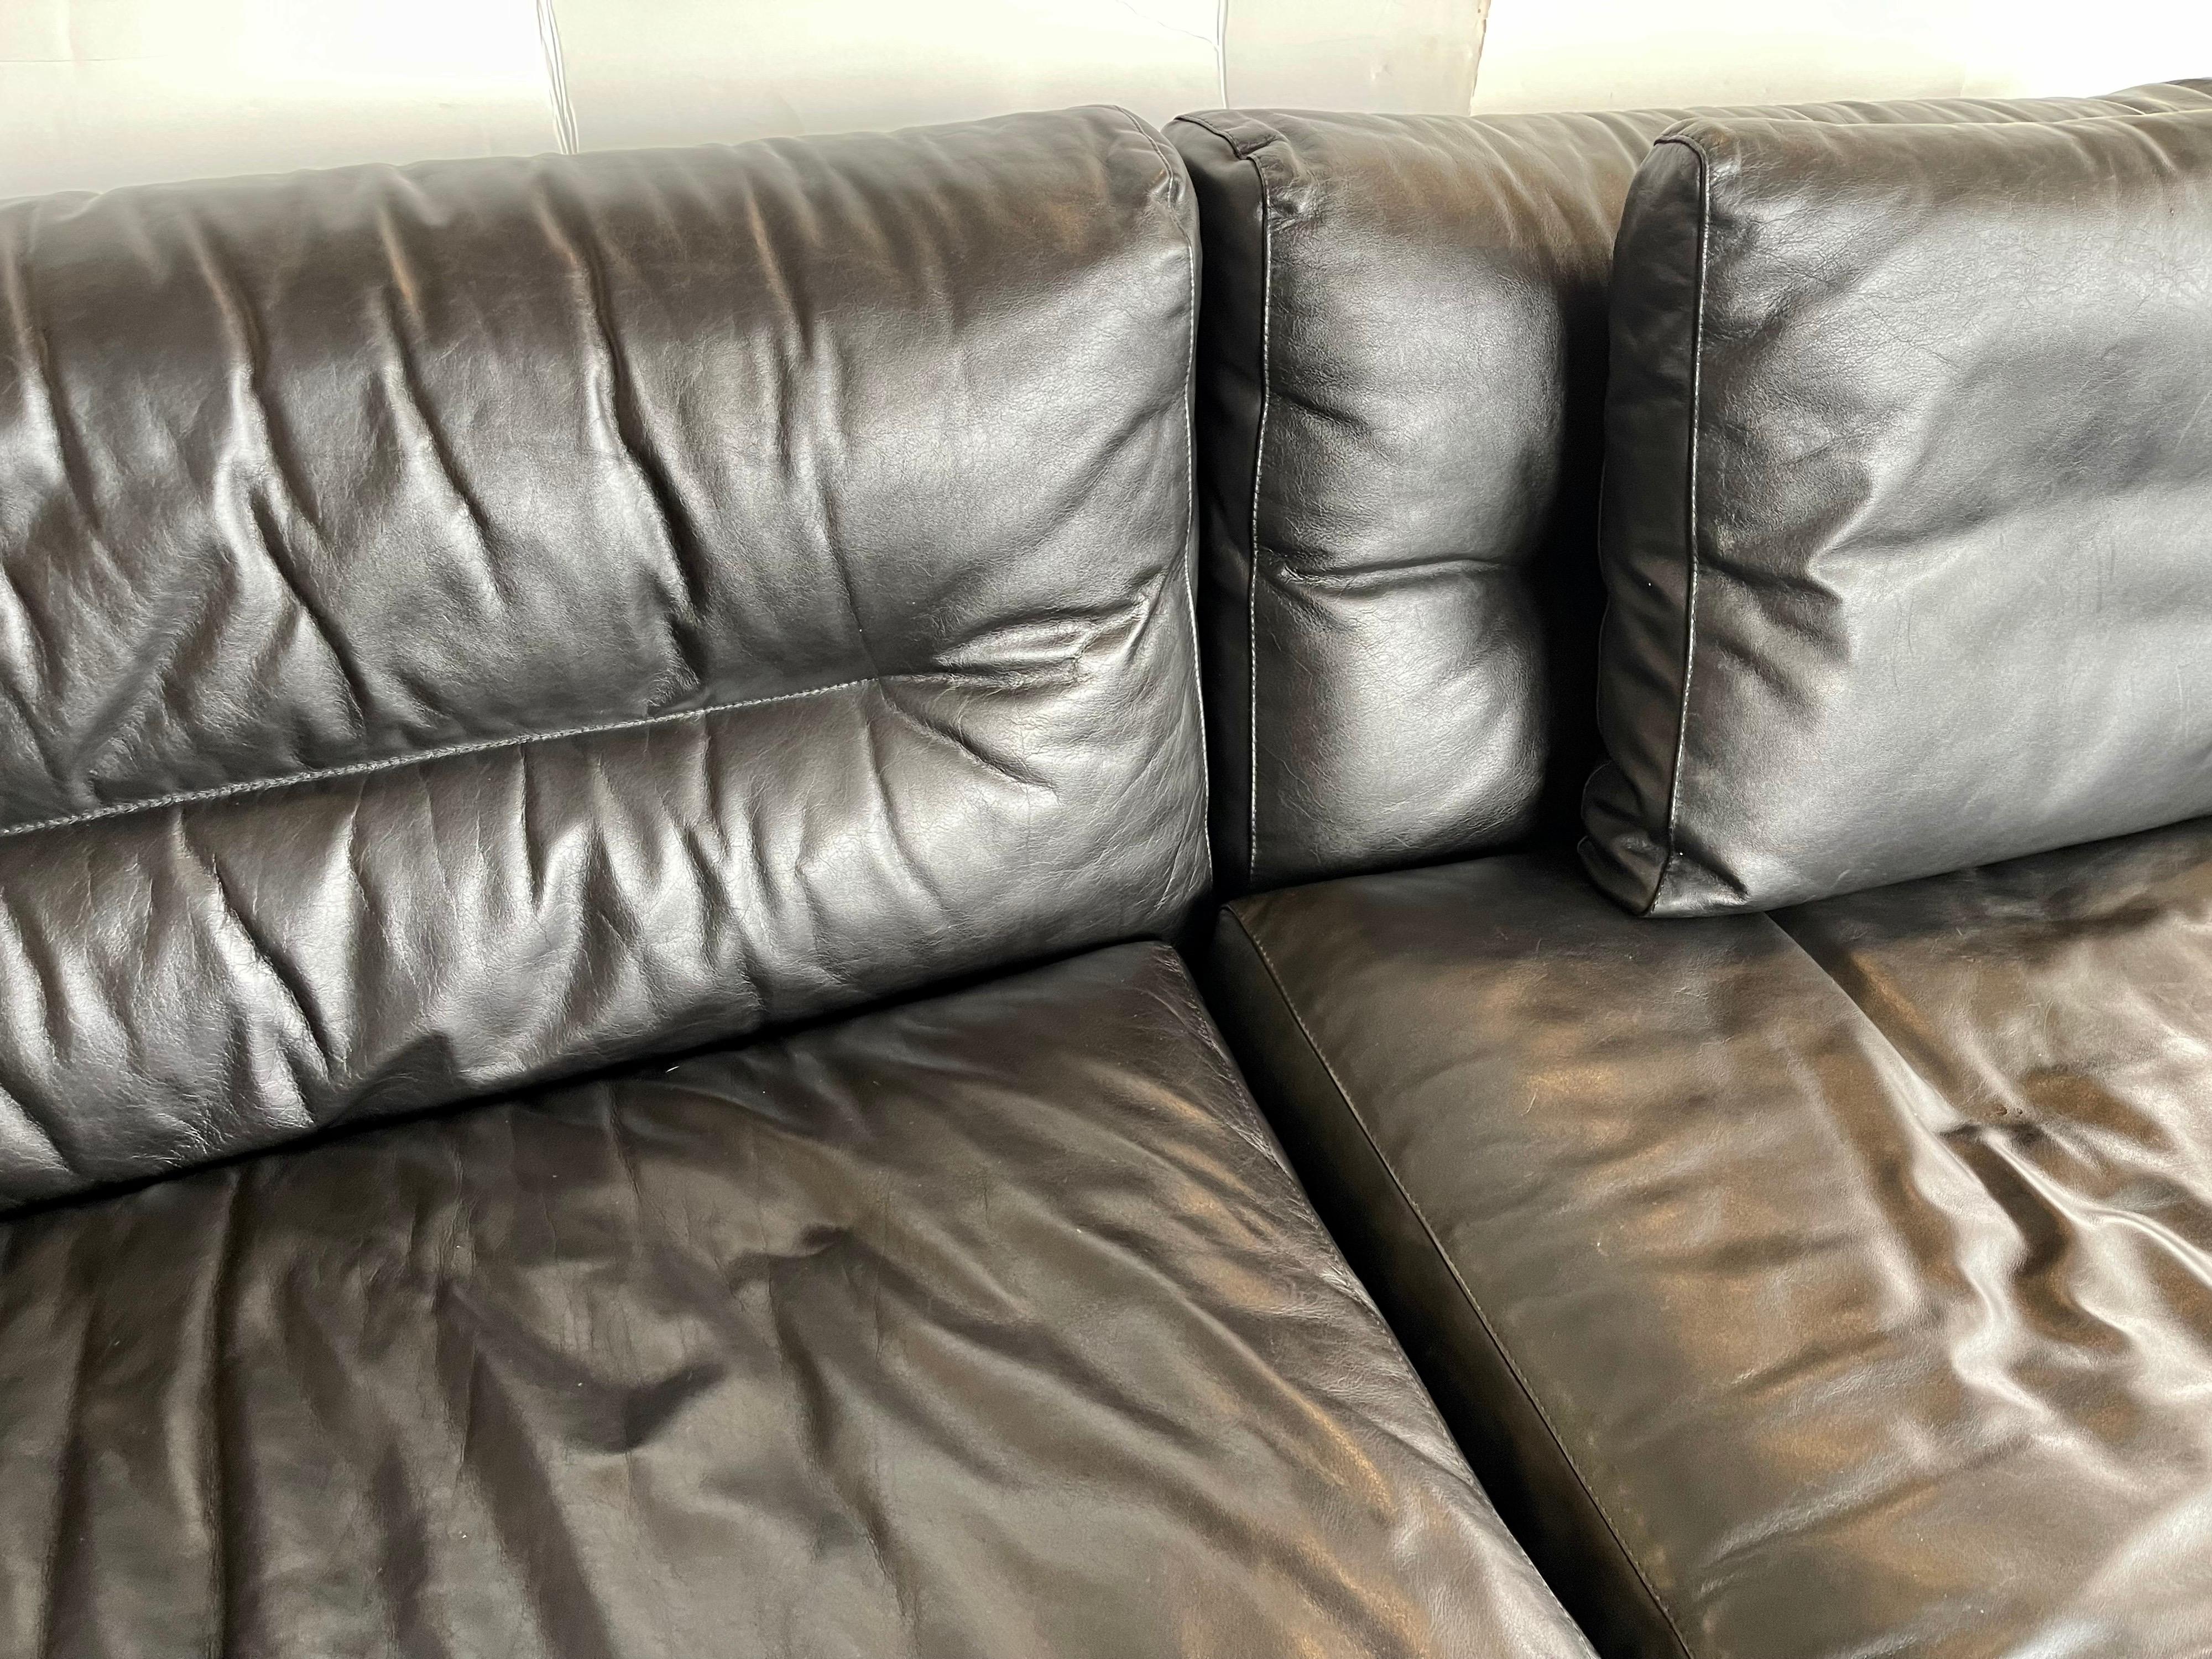 Contemporary Authentic Saporiti Italia Large Sleek Black Leather Sofa Sectional Made in Italy